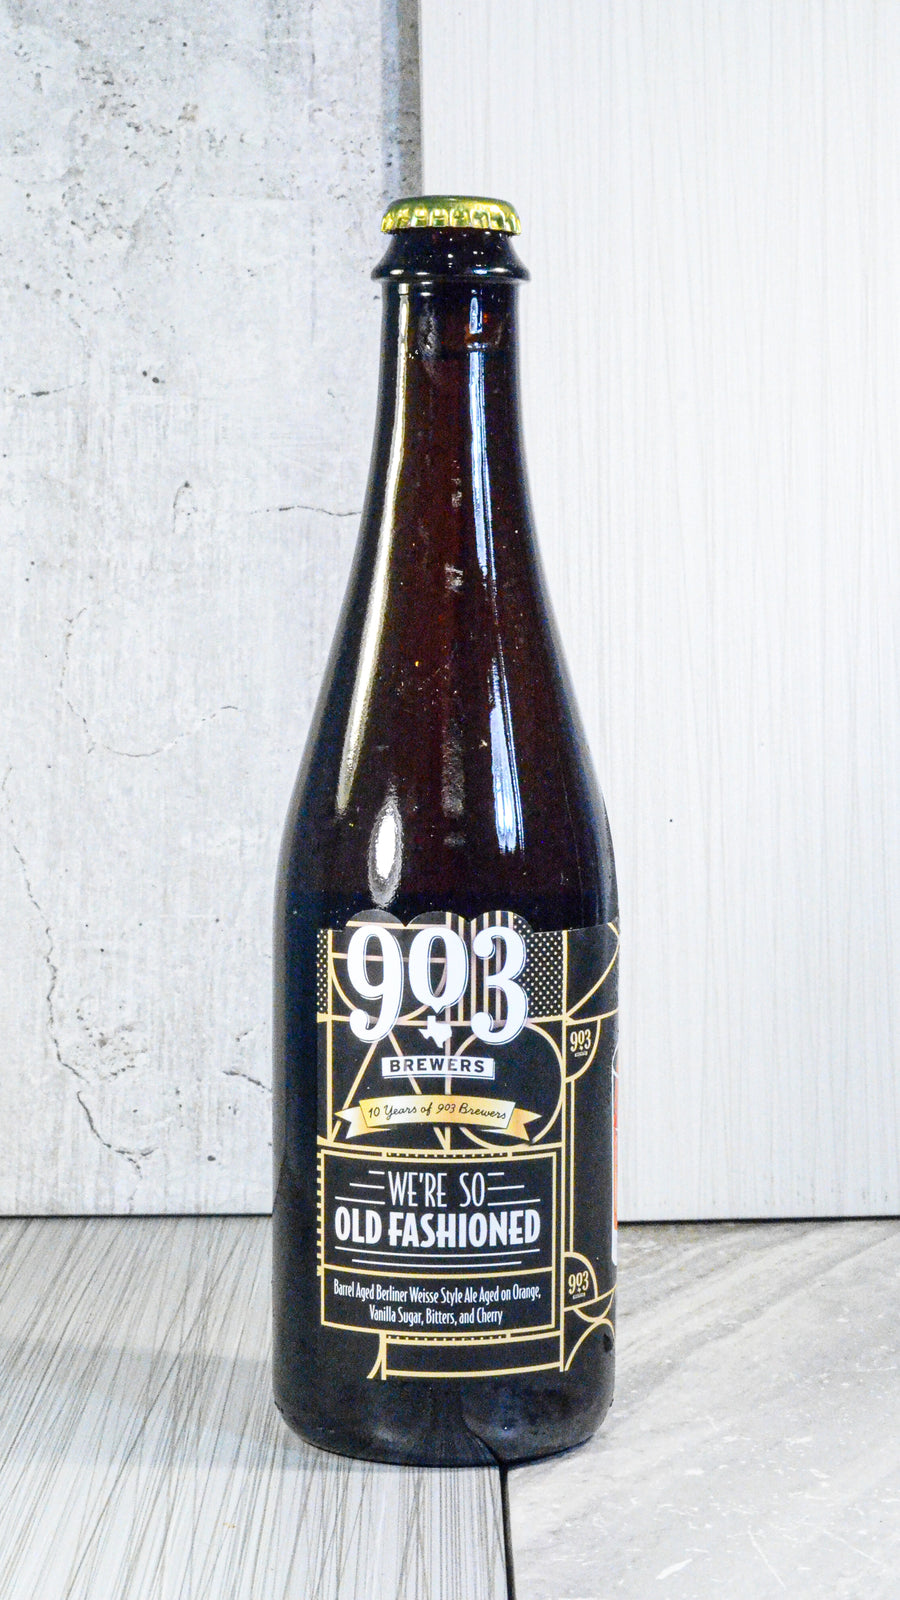 903 Brewers, We're So Old Fashioned 500ml